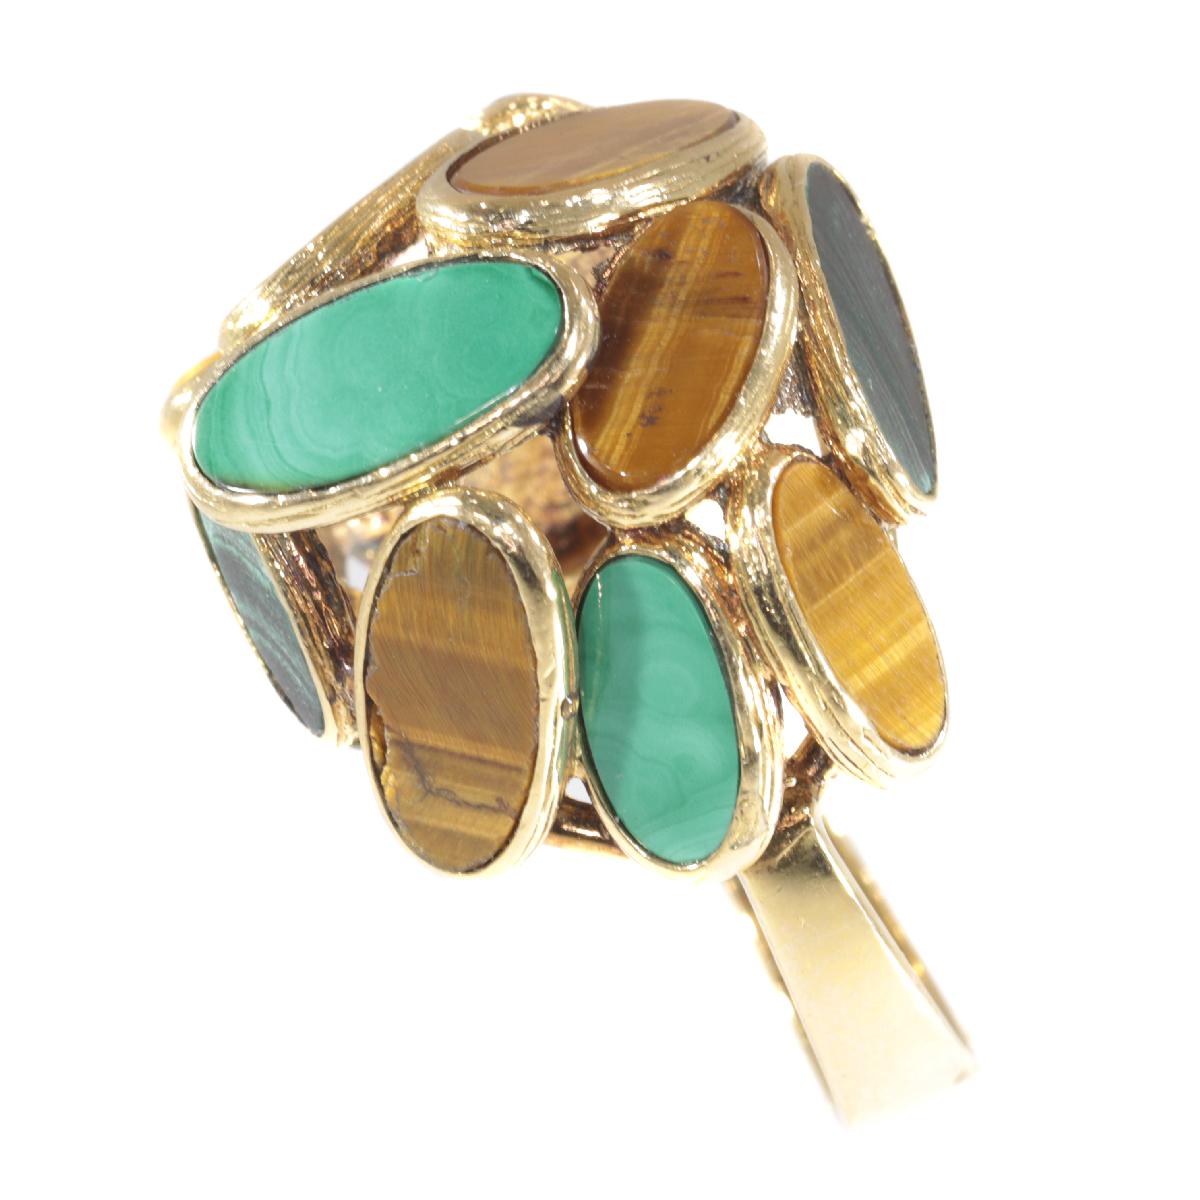 Women's Vintage Pop-Art 18 Karat Gold Ring Set with Malachite and Tiger Eye, 1960s For Sale